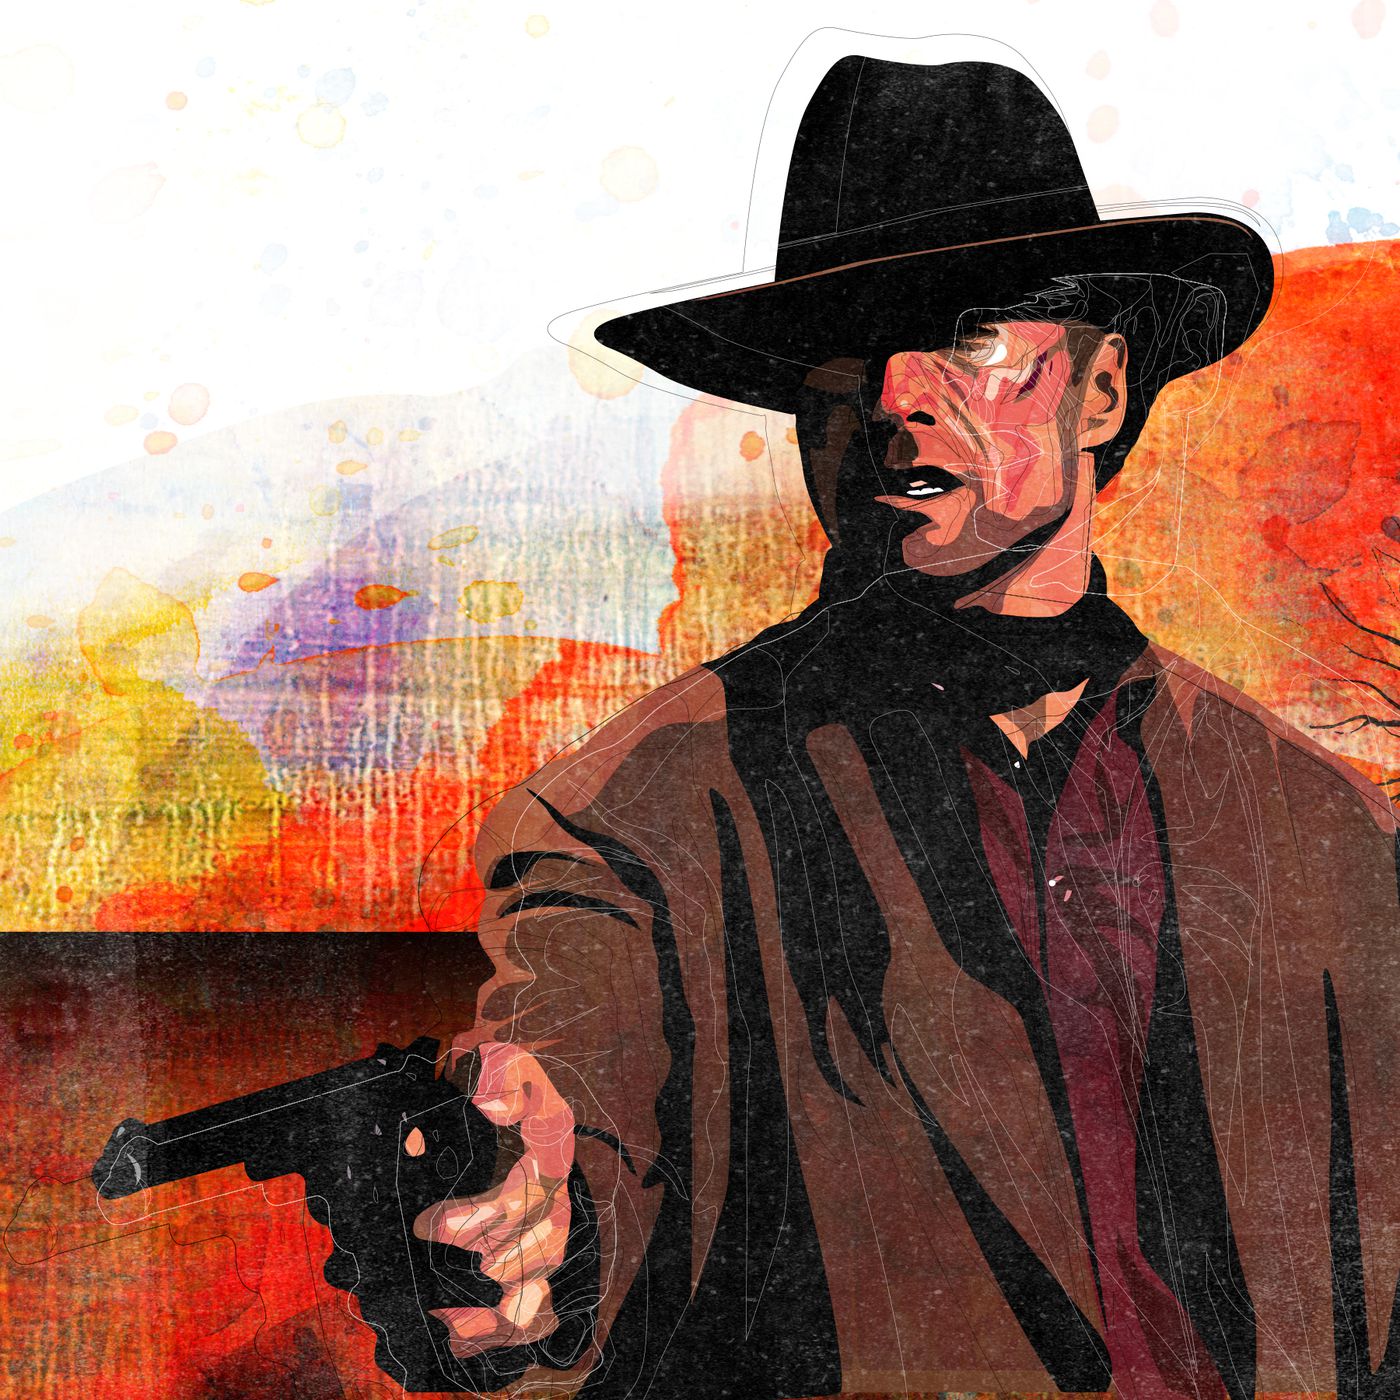 Clint Eastwood S Unforgiven Closed The Book On Movie Westerns The Ringer